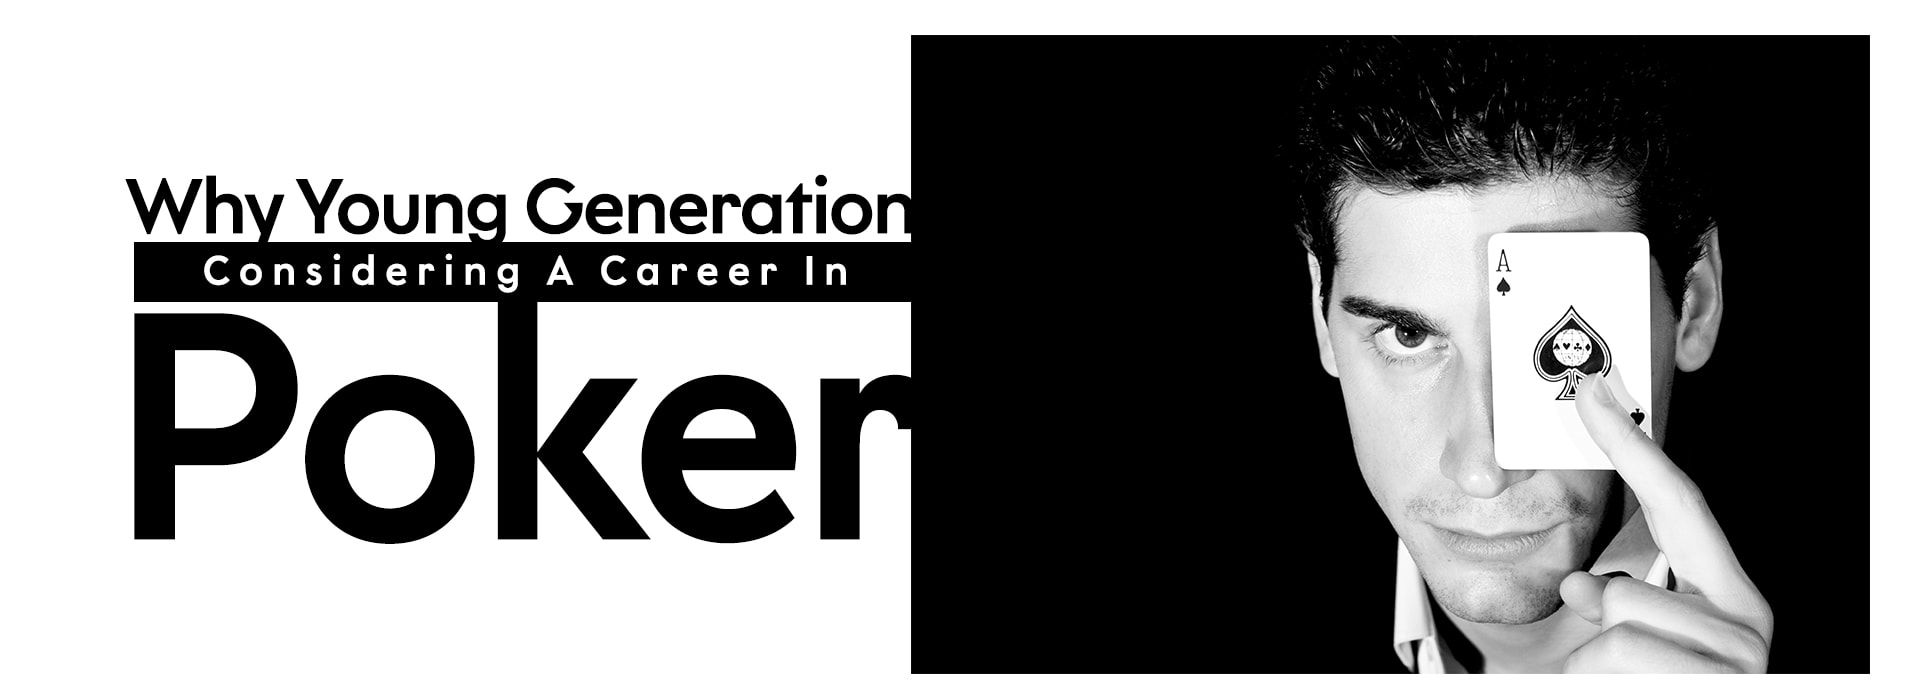 Why Young Generation Is Considering A Career In Poker